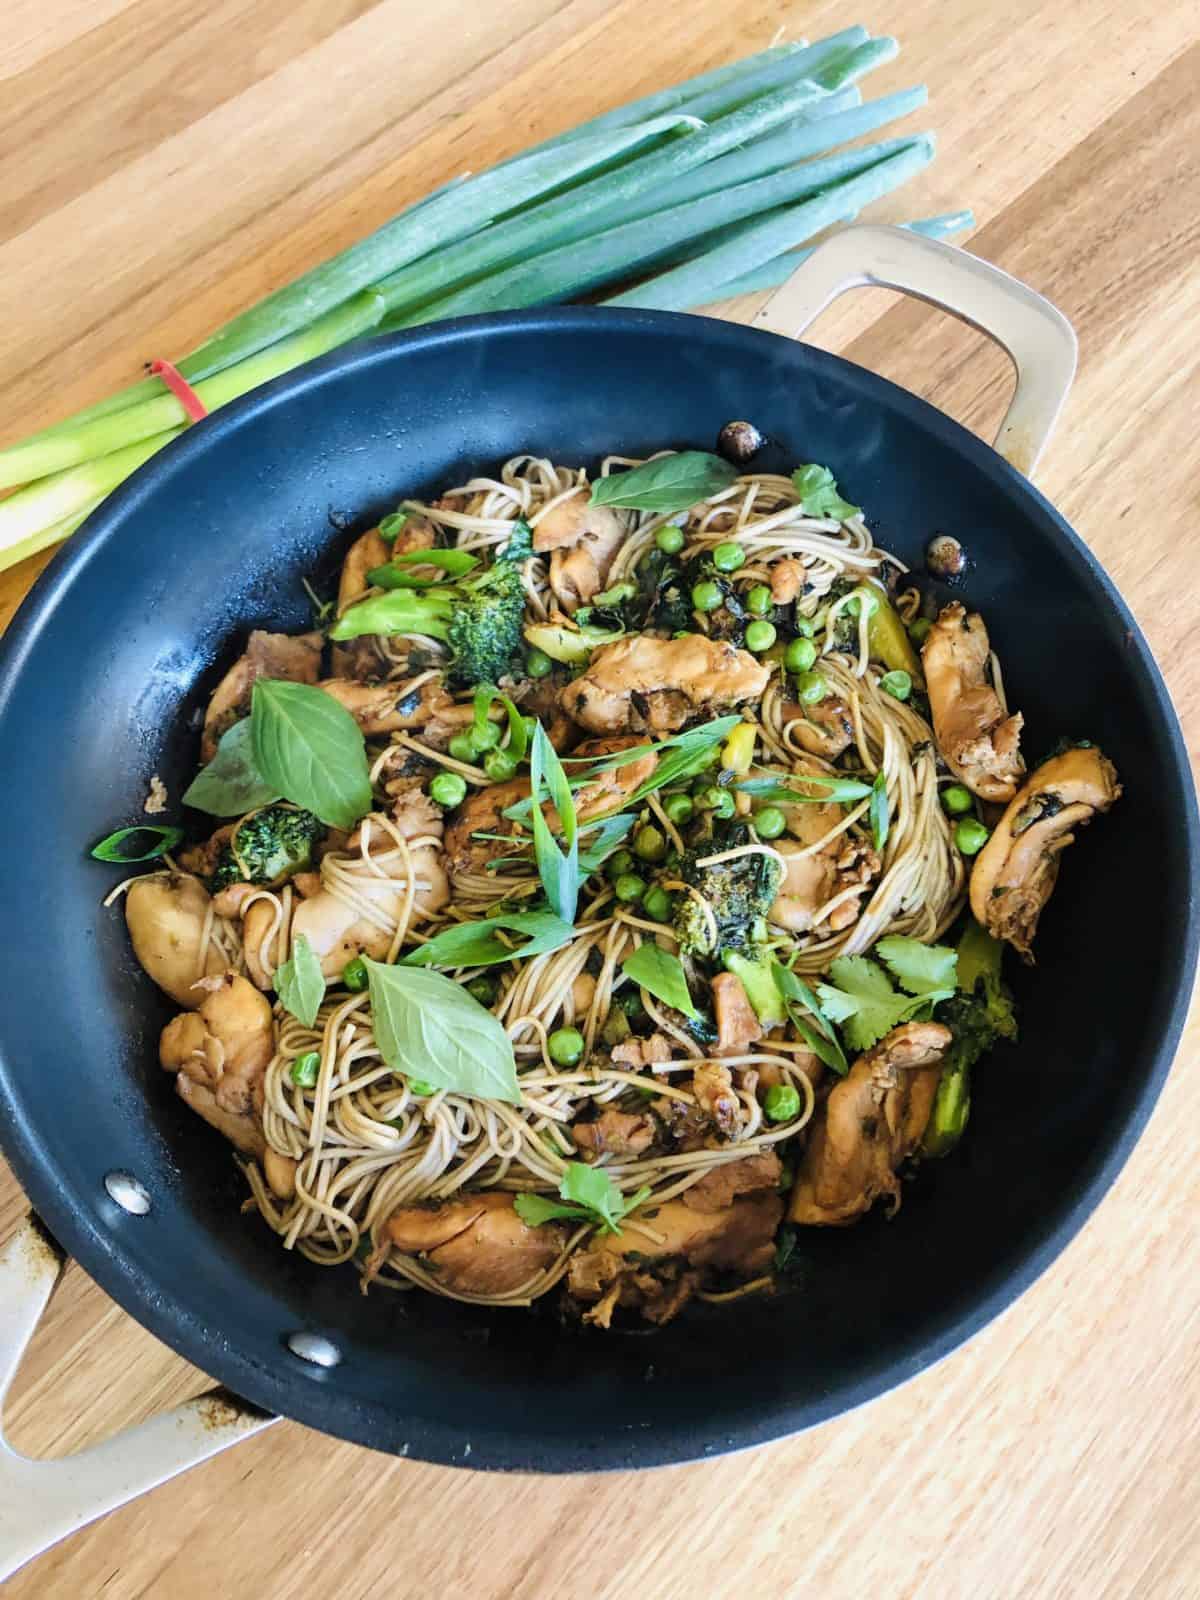 Chicken and Broccoli Stir fry with Soba Noodles